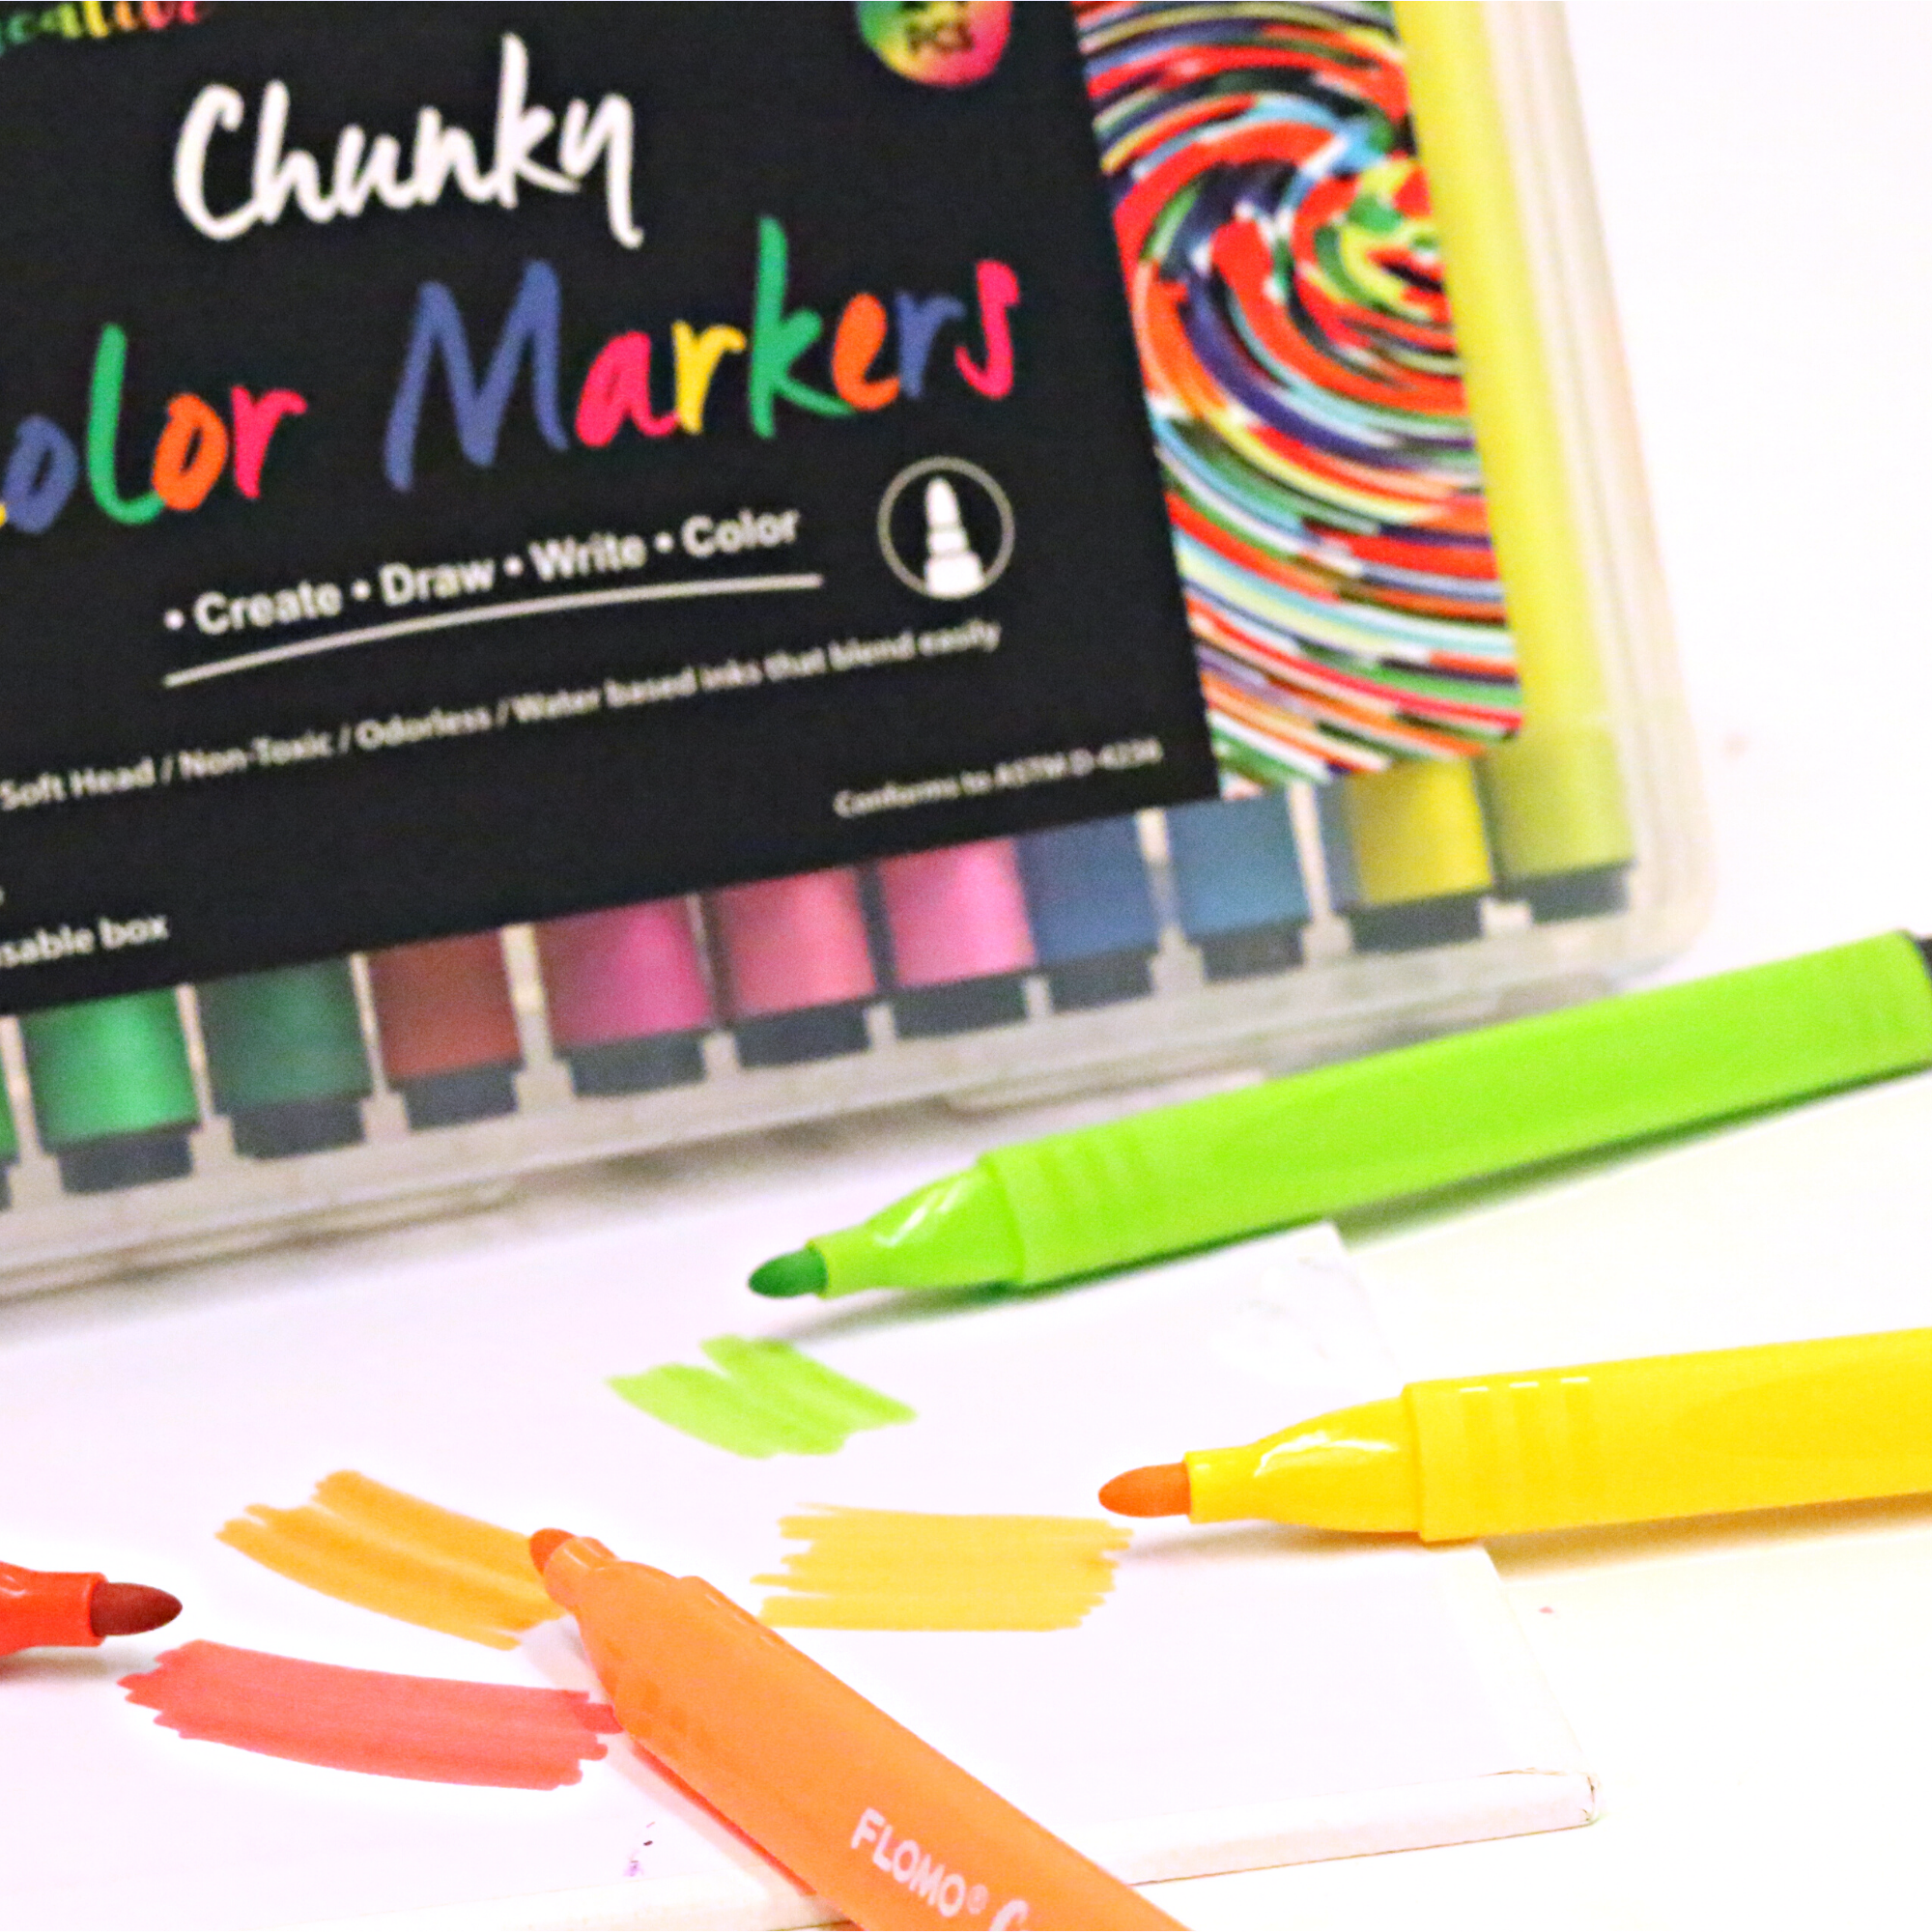 Onmust Stamp Markers for Kids, Washable Watercolor